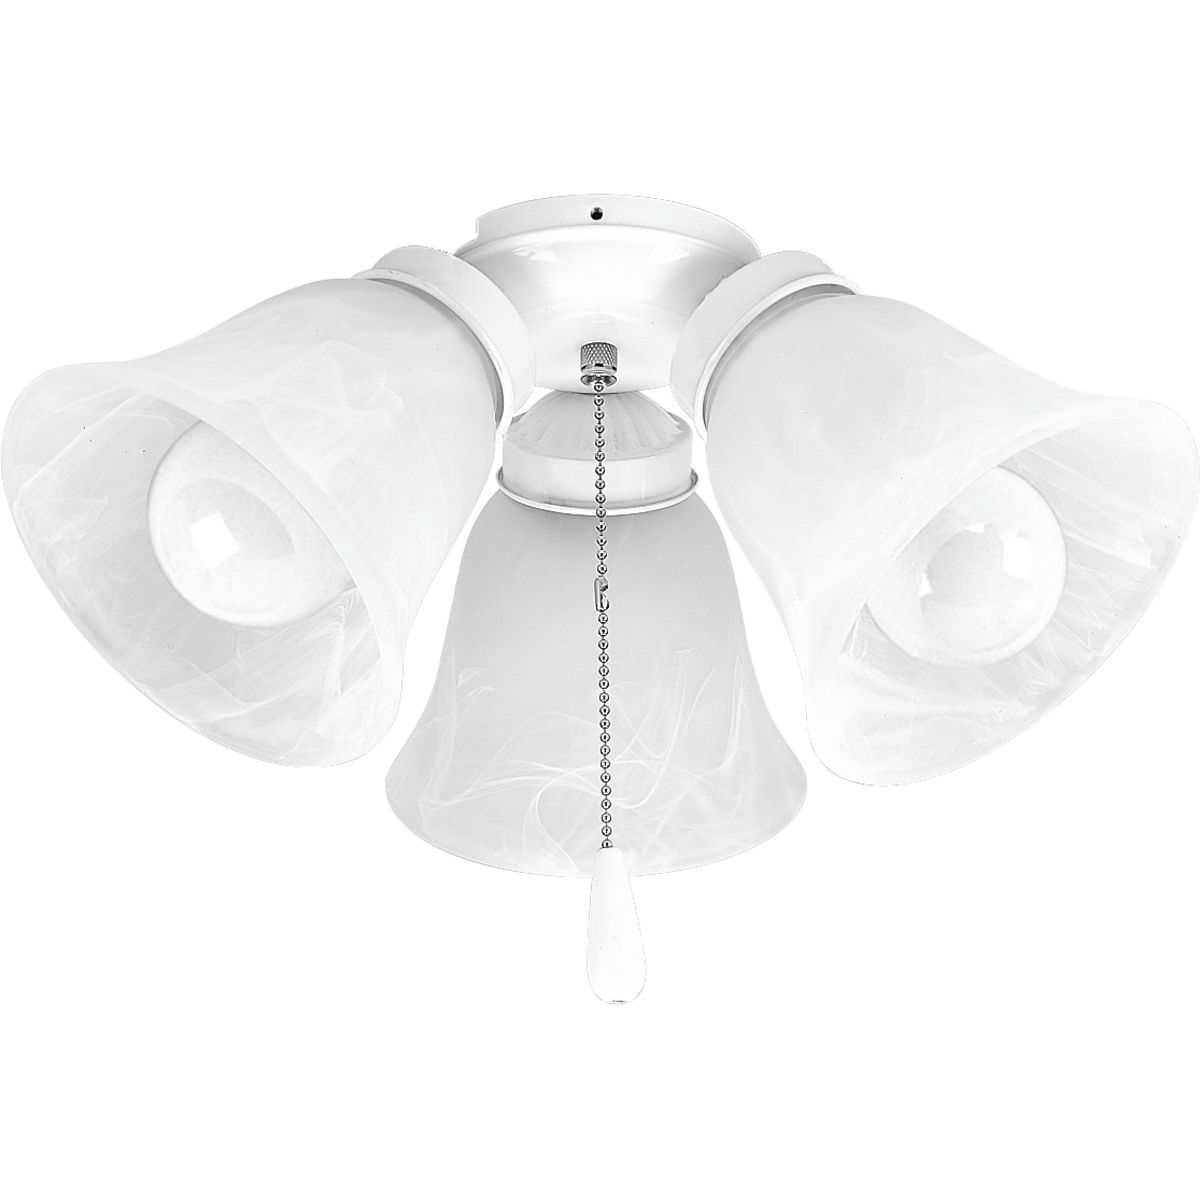 Three-light kit with white washed alabaster style glass shades beautiful in design. White finish corresponds with a chrome pull-chain and white fob. Innovative spring clip glass attachment system eliminates unsightly excess hardware. Good for use with P2500 and P2501 ceiling fans and includes quick connector for easy wiring. Includes three 3000K, 800 lumen, Title 24 certified LED bulbs.